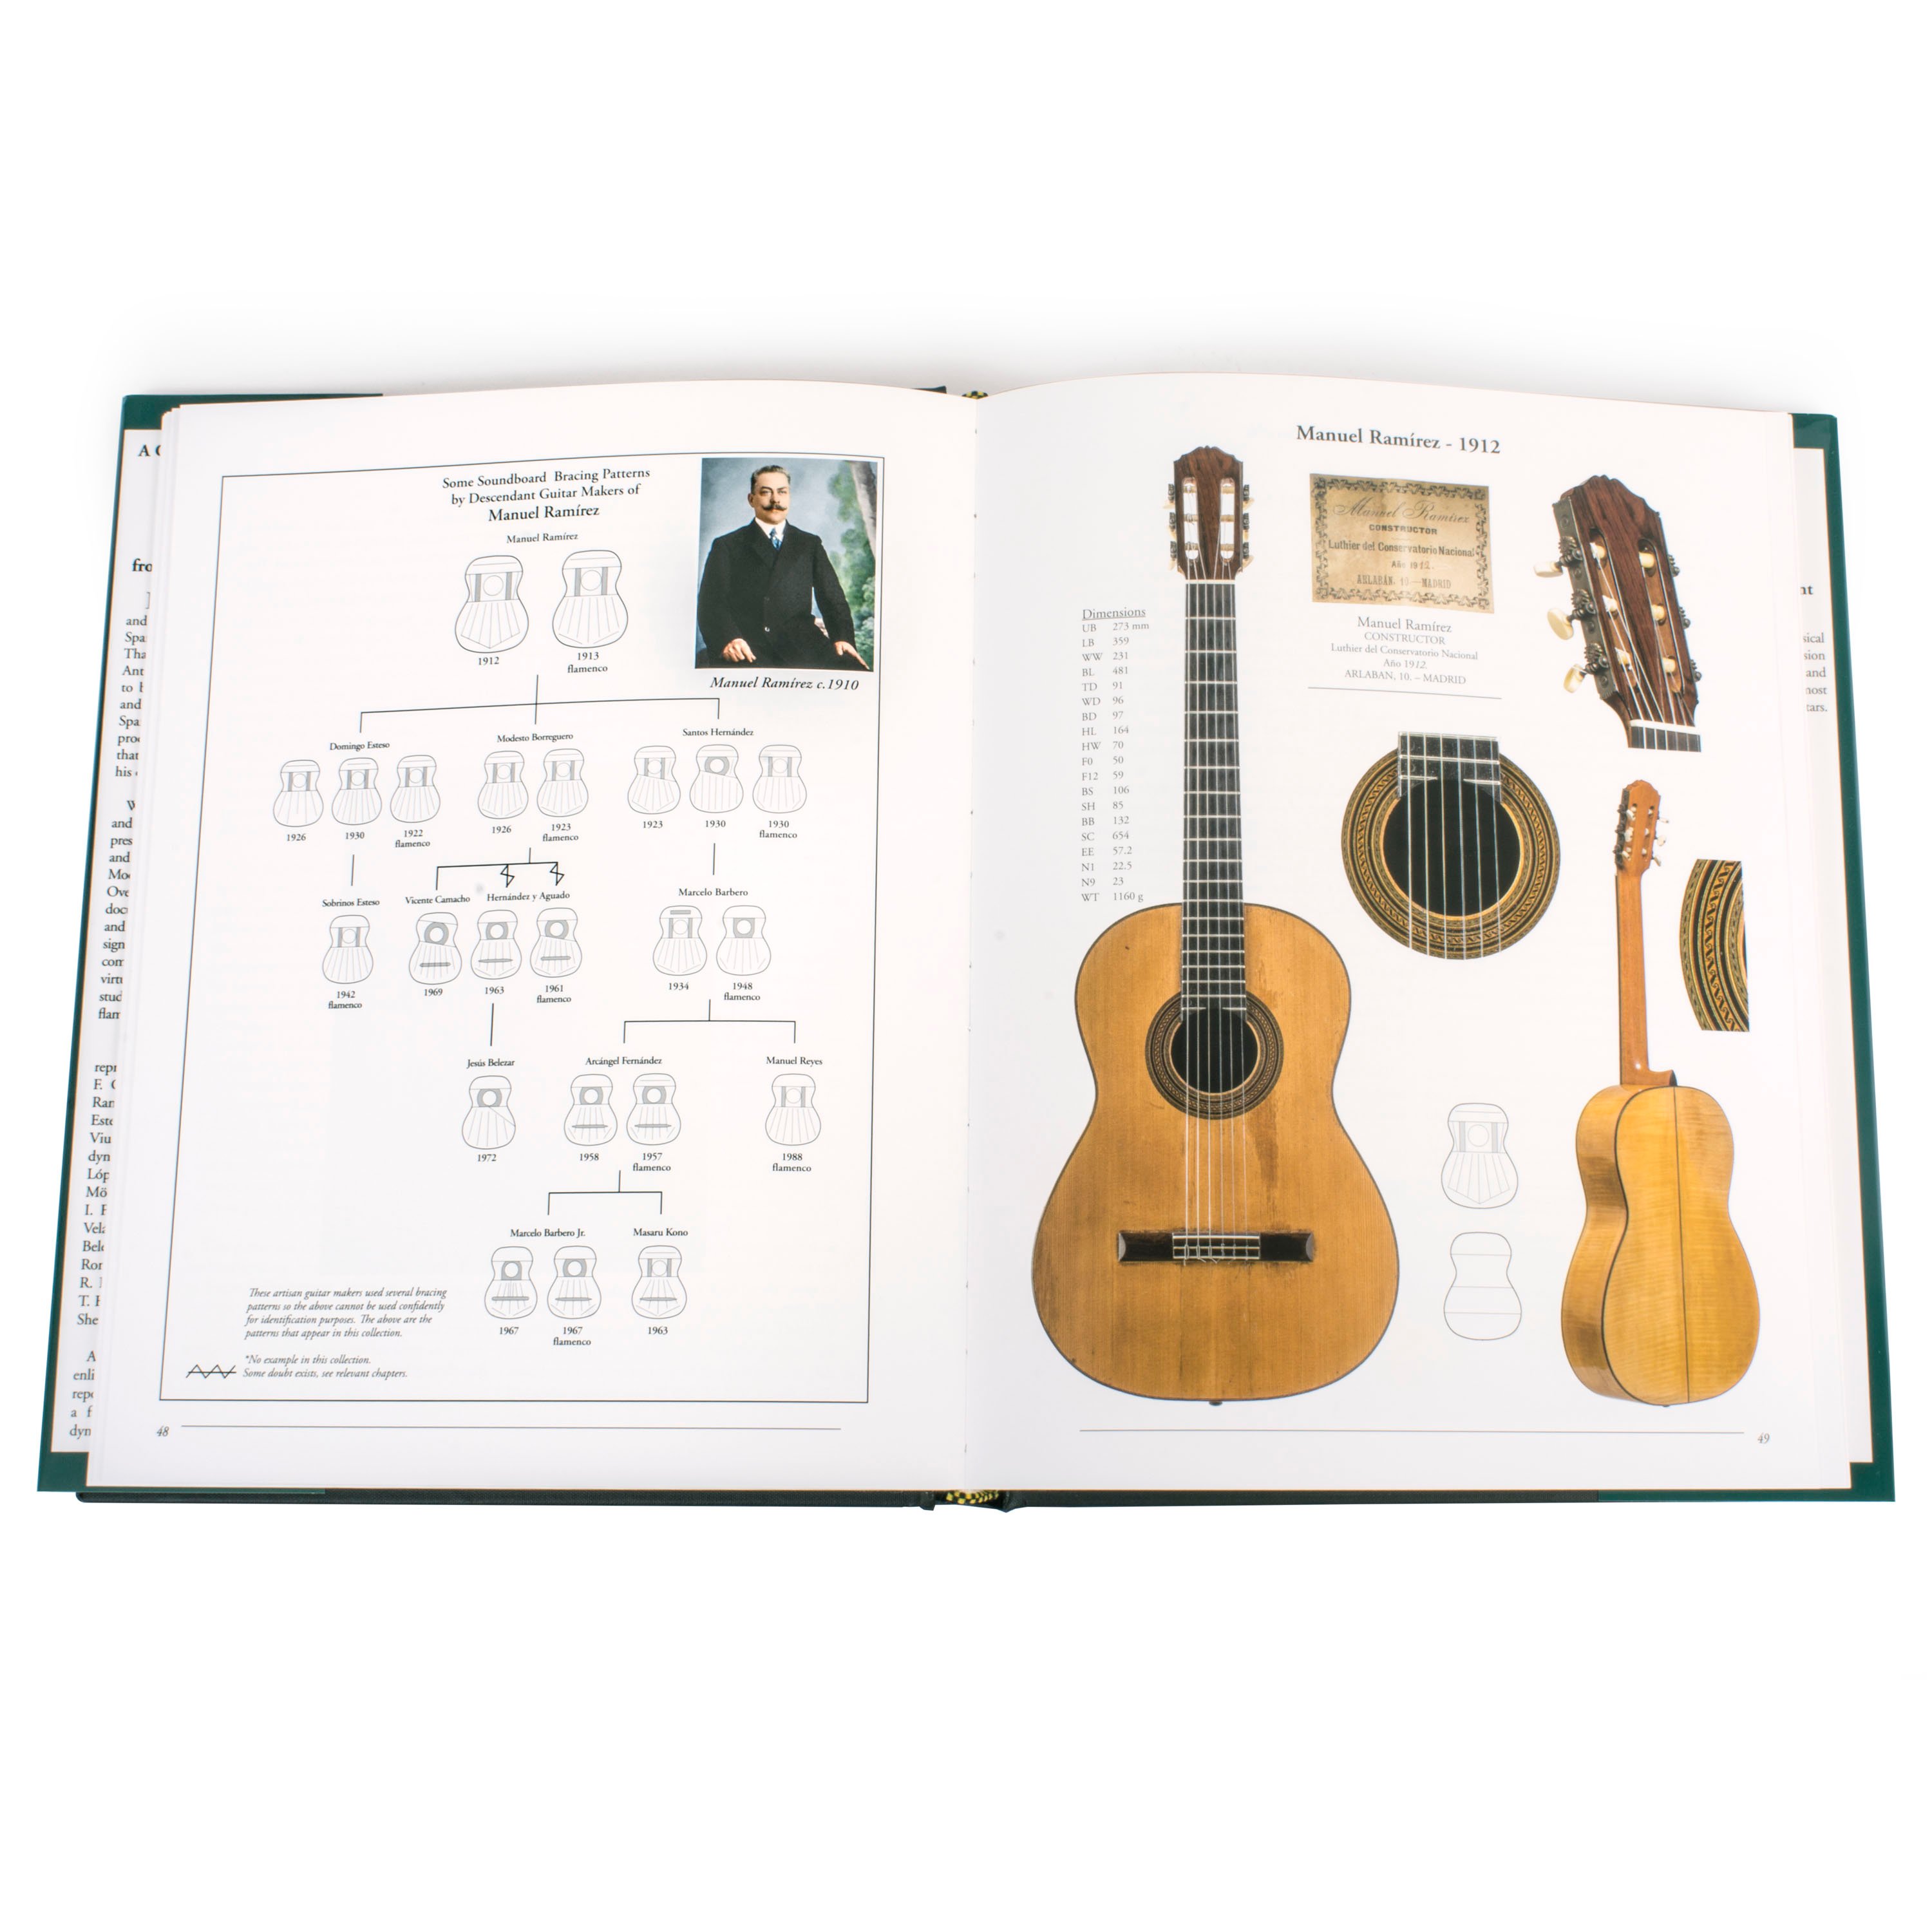 A Collection of Fine Spanish Guitars from Torres to the Present, Second Edition